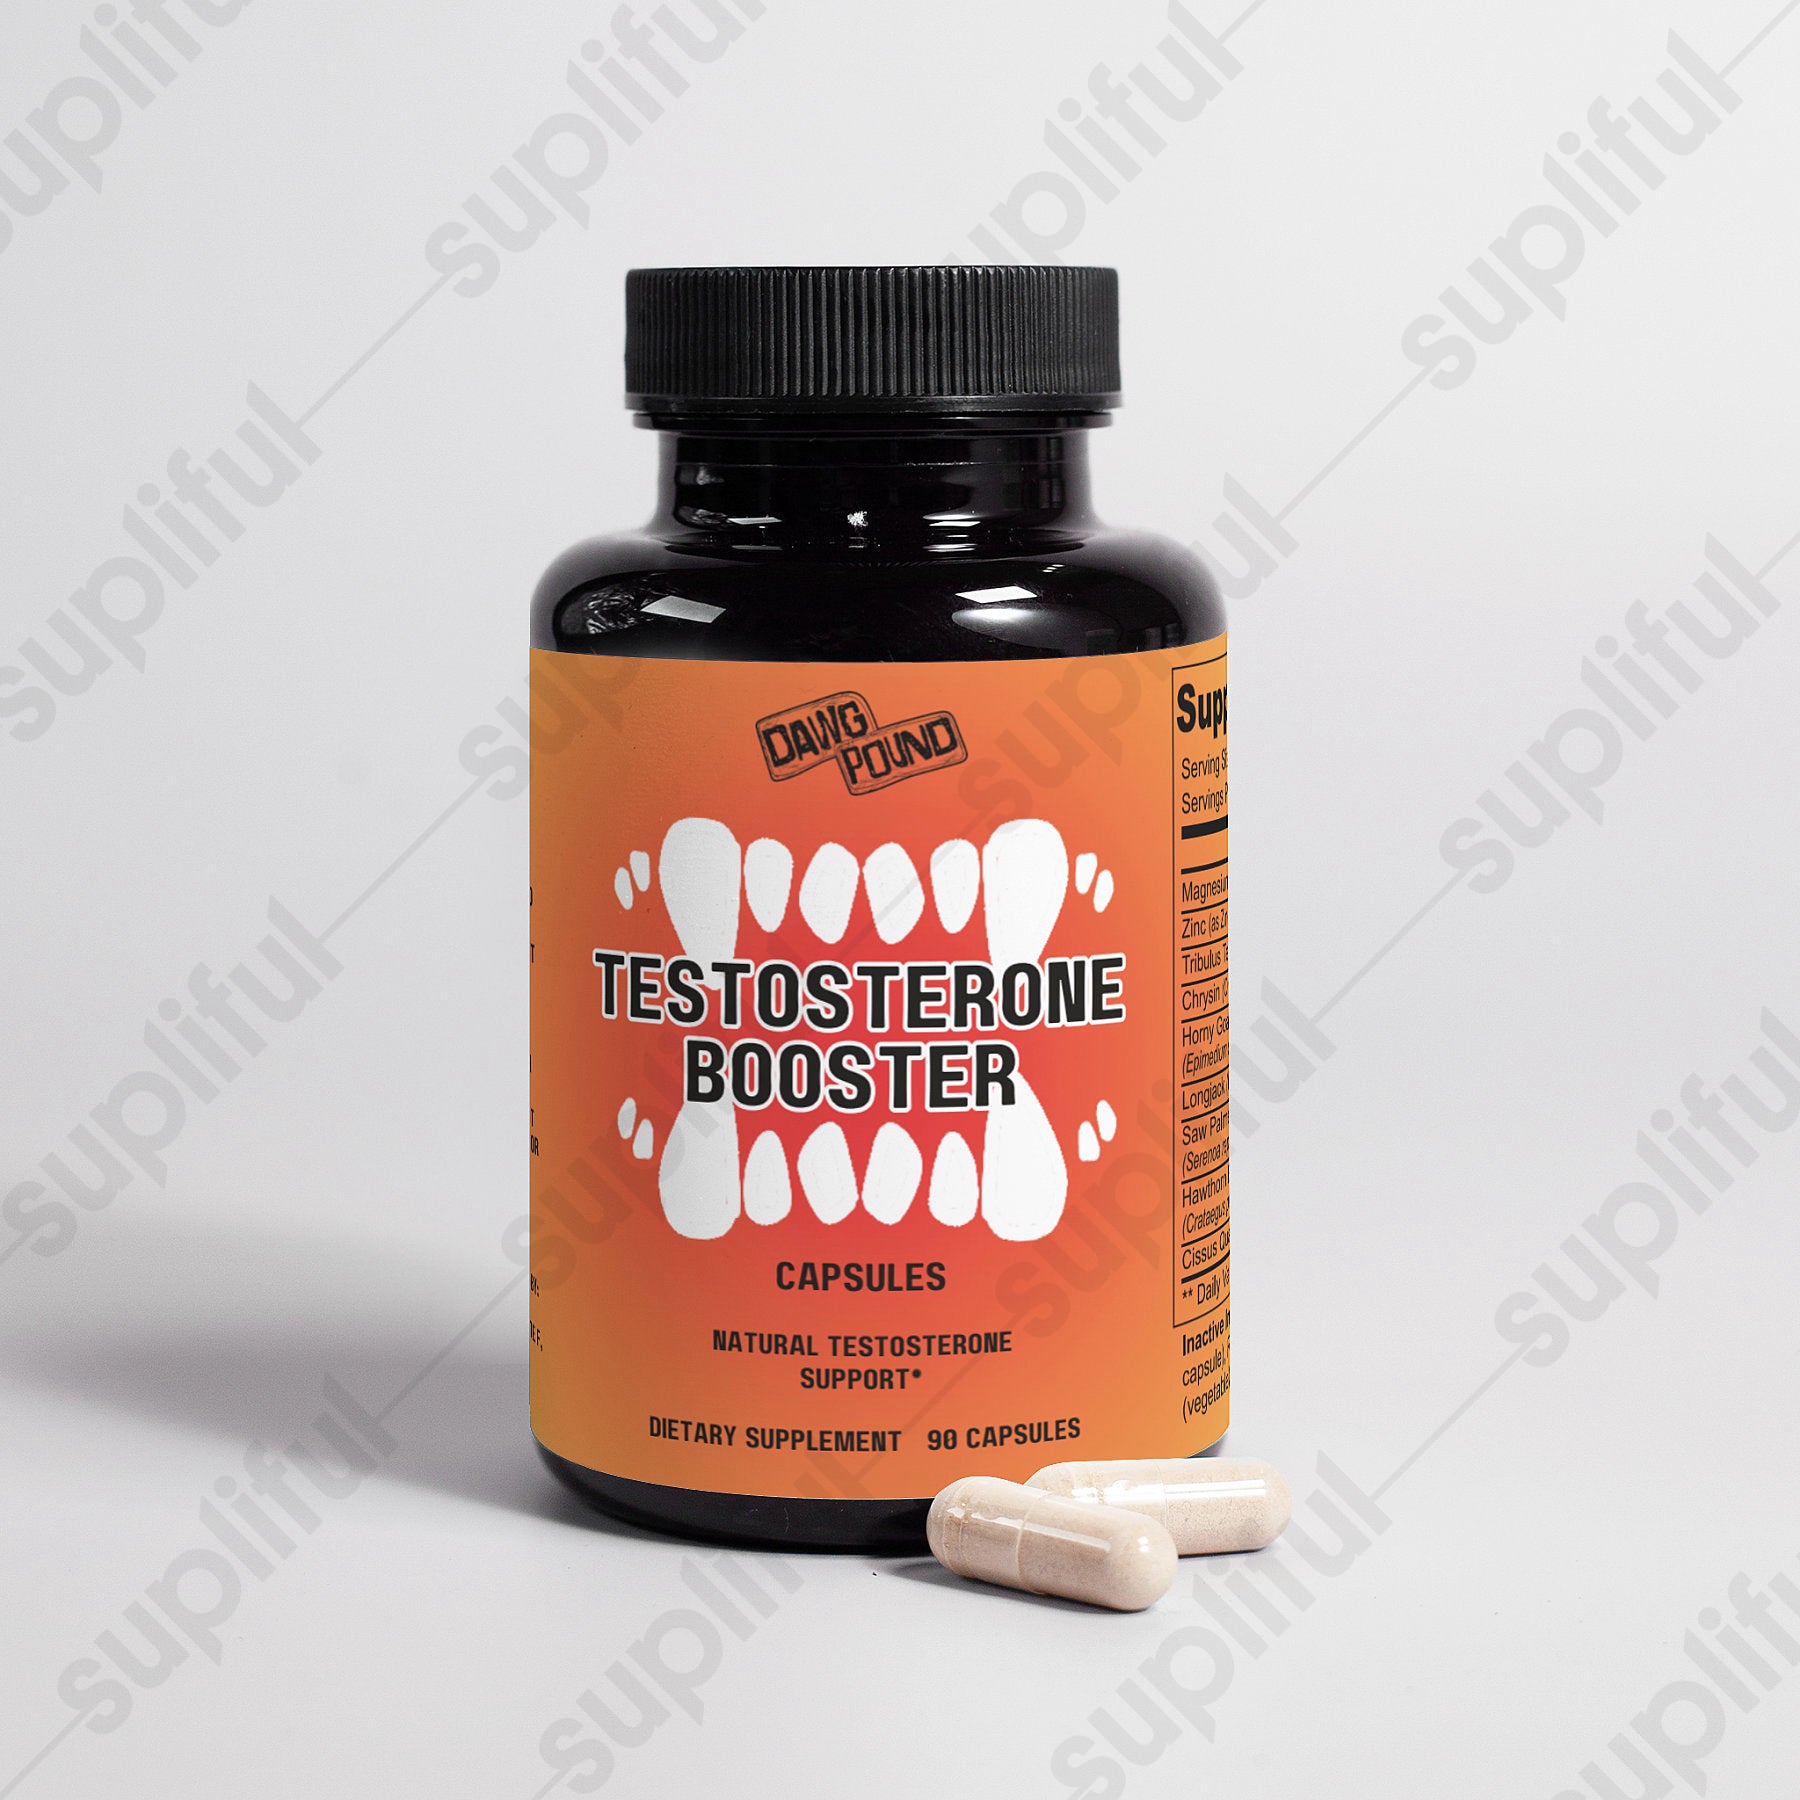 Dawg Pound Testosterone Booster Capsules - Front View with Capsules Displayed in Front